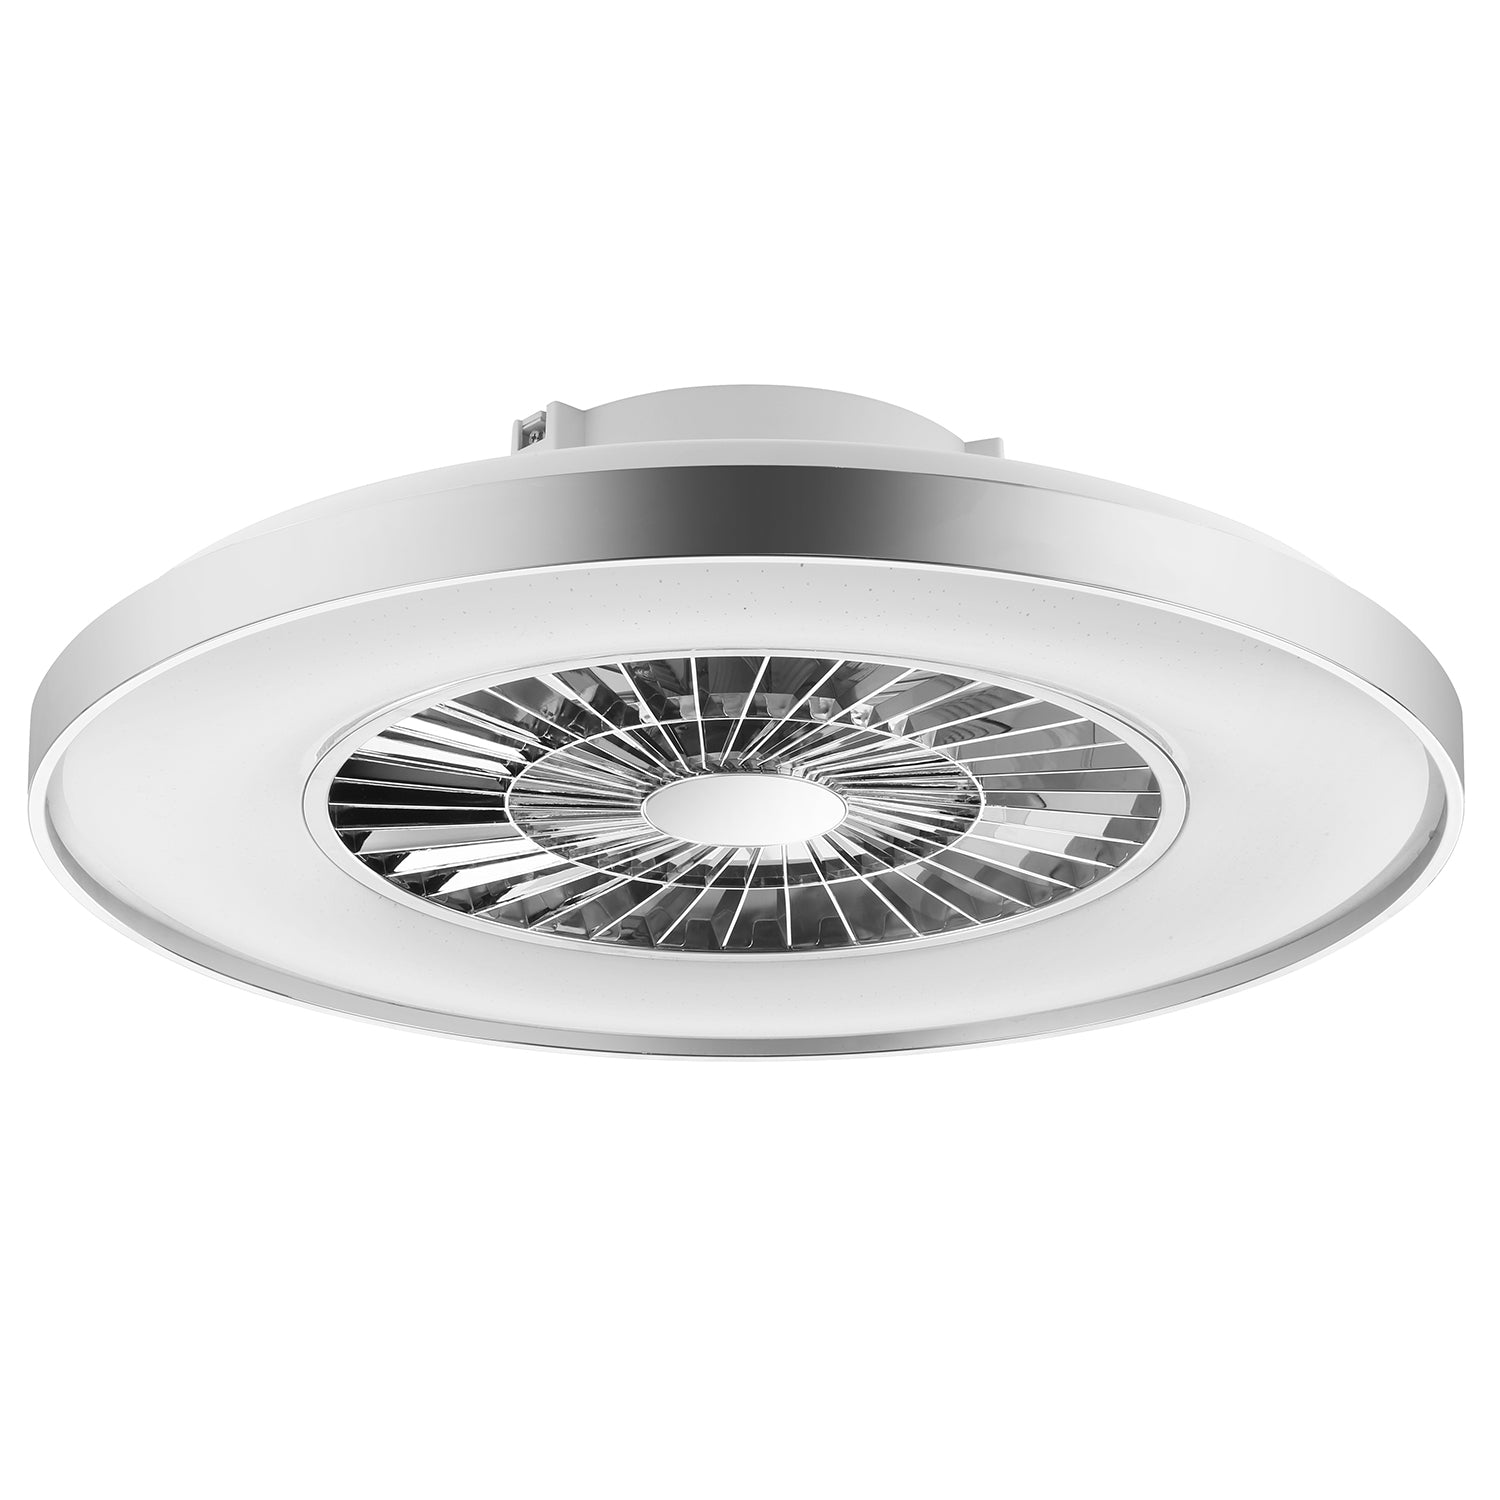 Tuya Smart Control Ceiling Fan Light D:604mm with Chrome Plated Frame